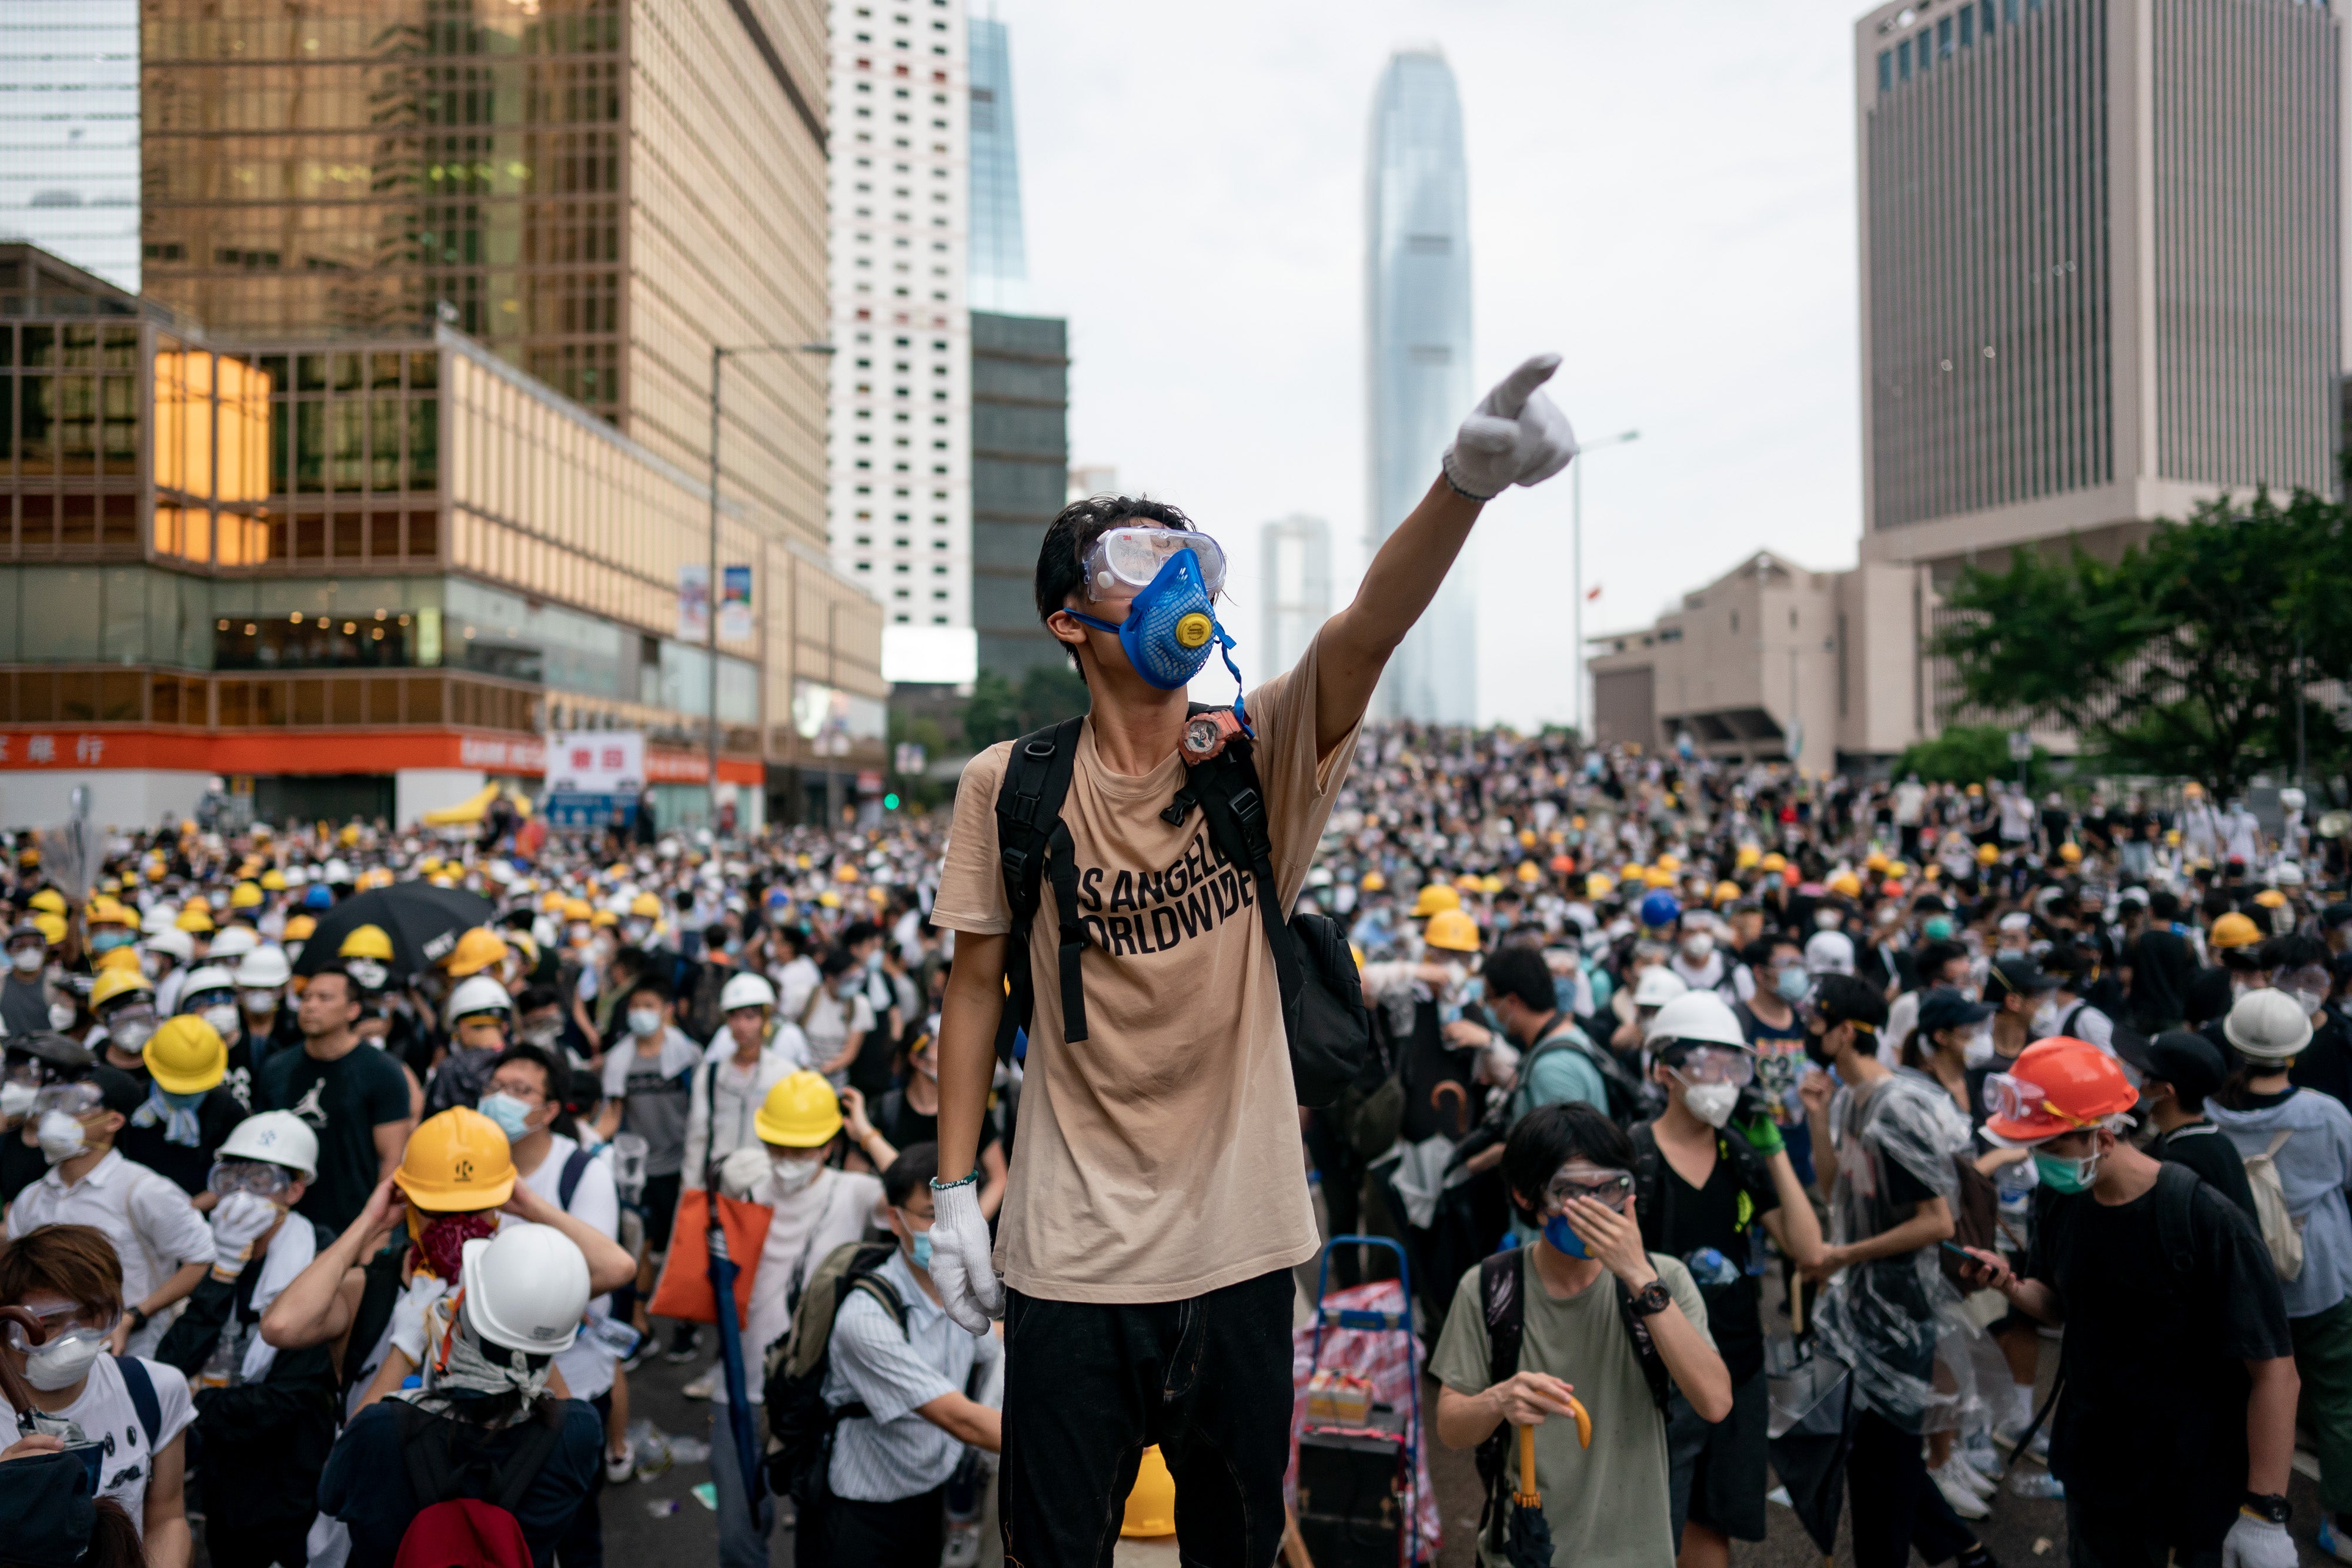 The citizen has been detained on charges linked to Hong Kong protests